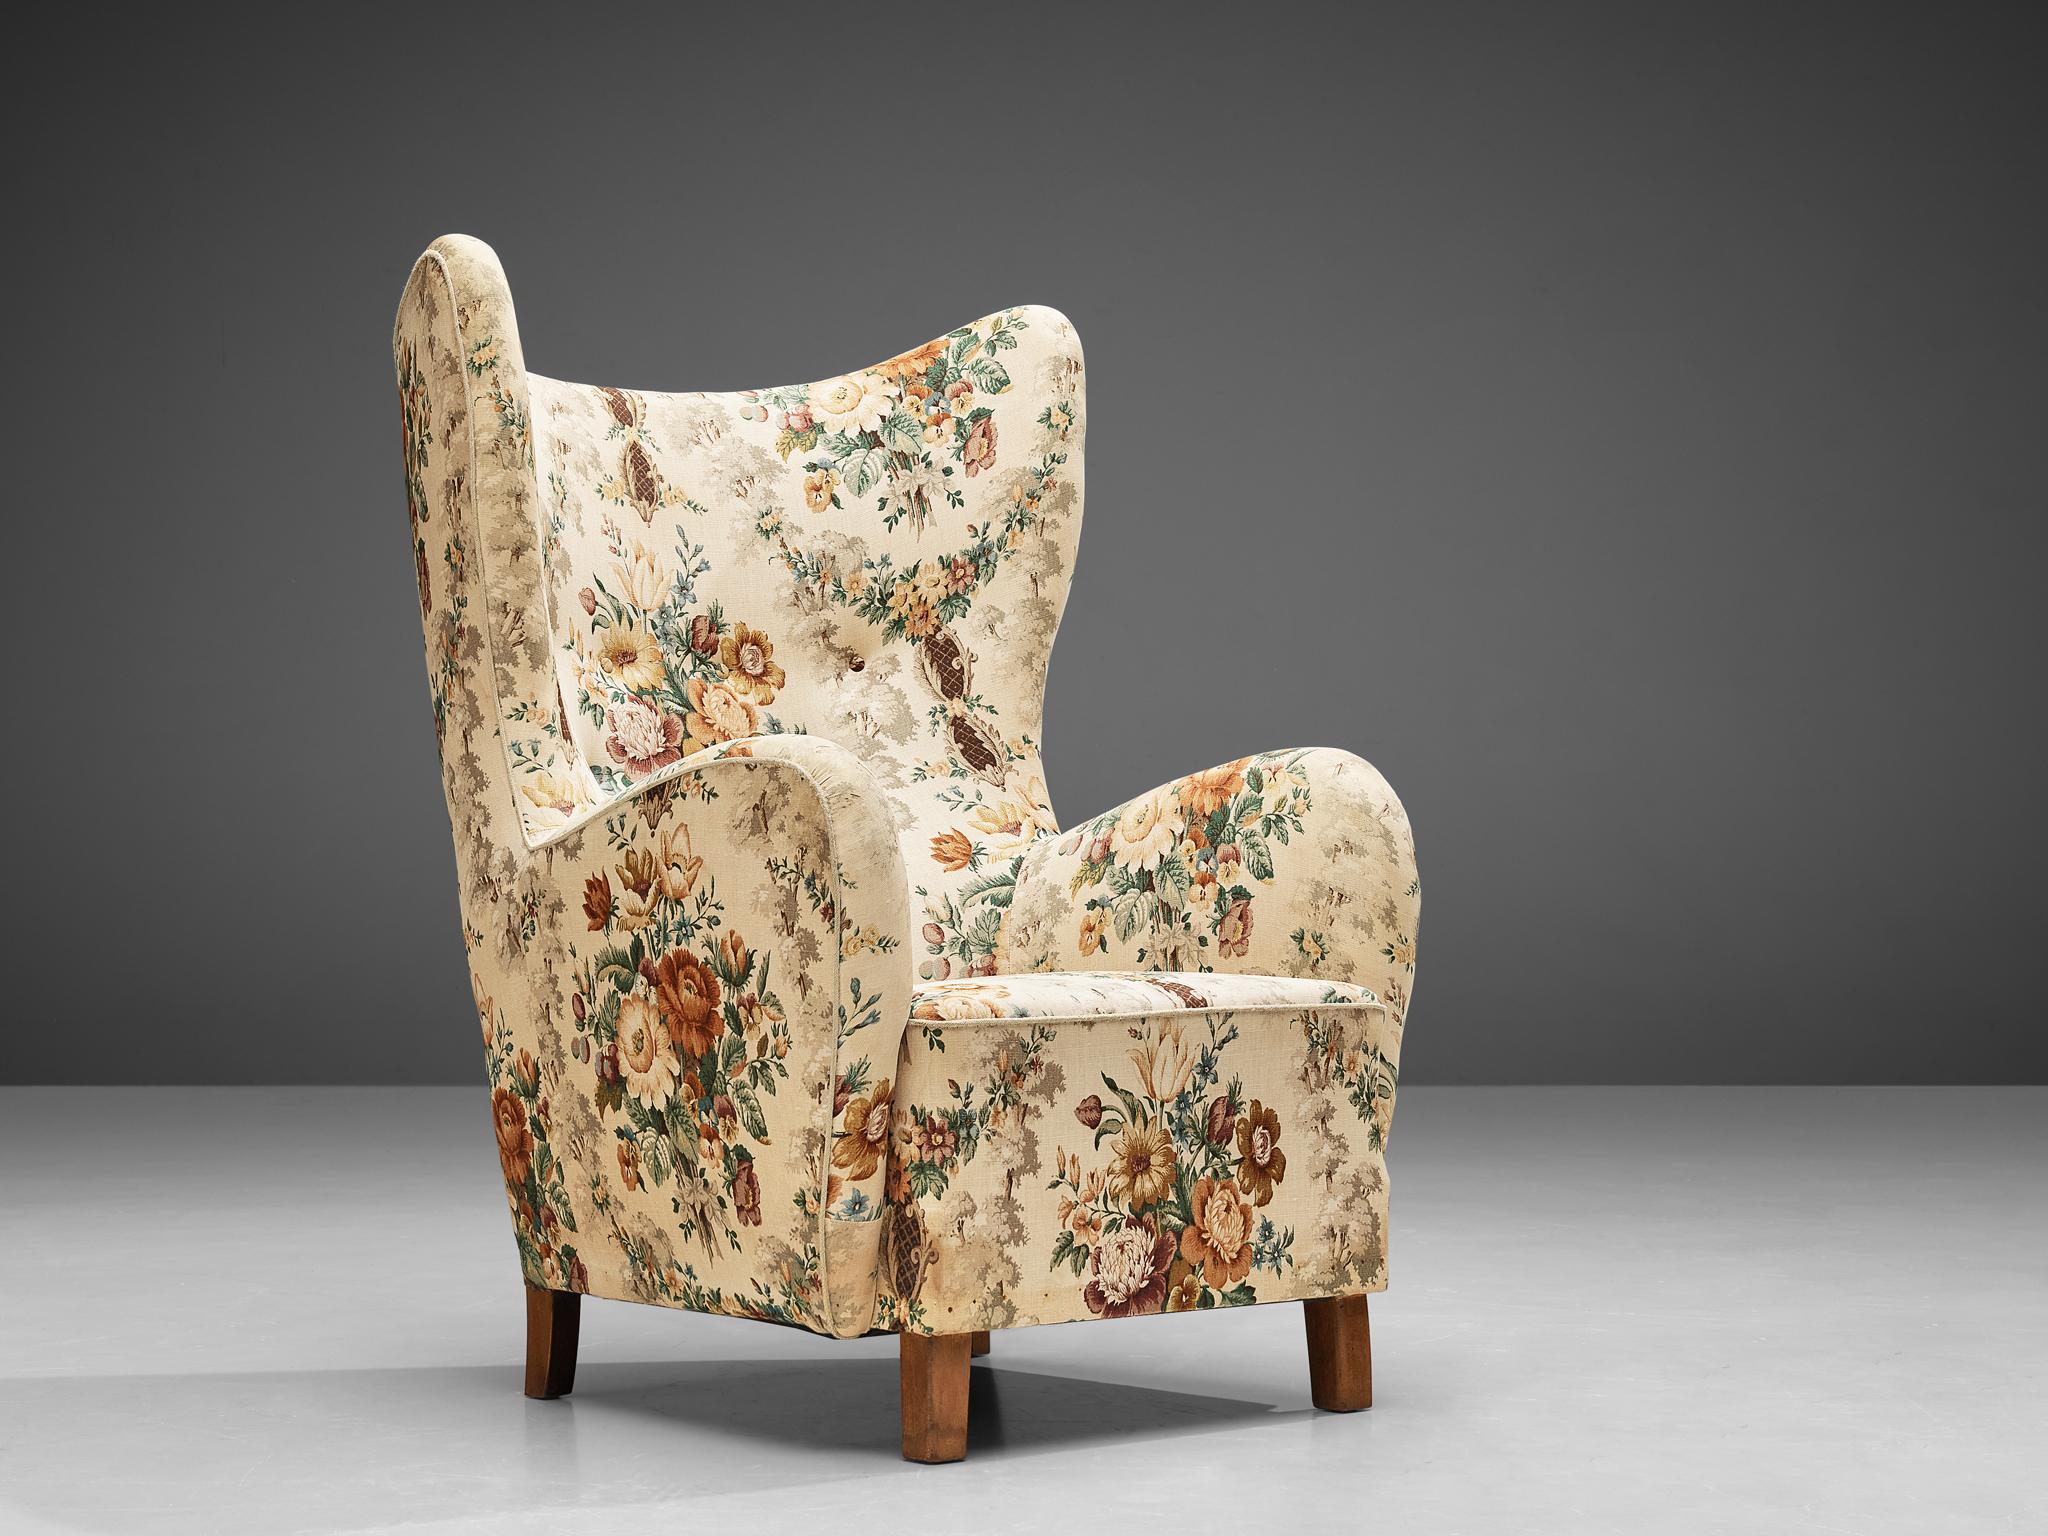 Fritz Hansen, armchair, fabric, oak, Denmark, 1950s.

This archetypical wingback chair of the 1950s is both extremely comfortable and pleasing to the eyes. Soft edges, tilted shapes and beautiful upholstery make this a truly mid-modern armchair